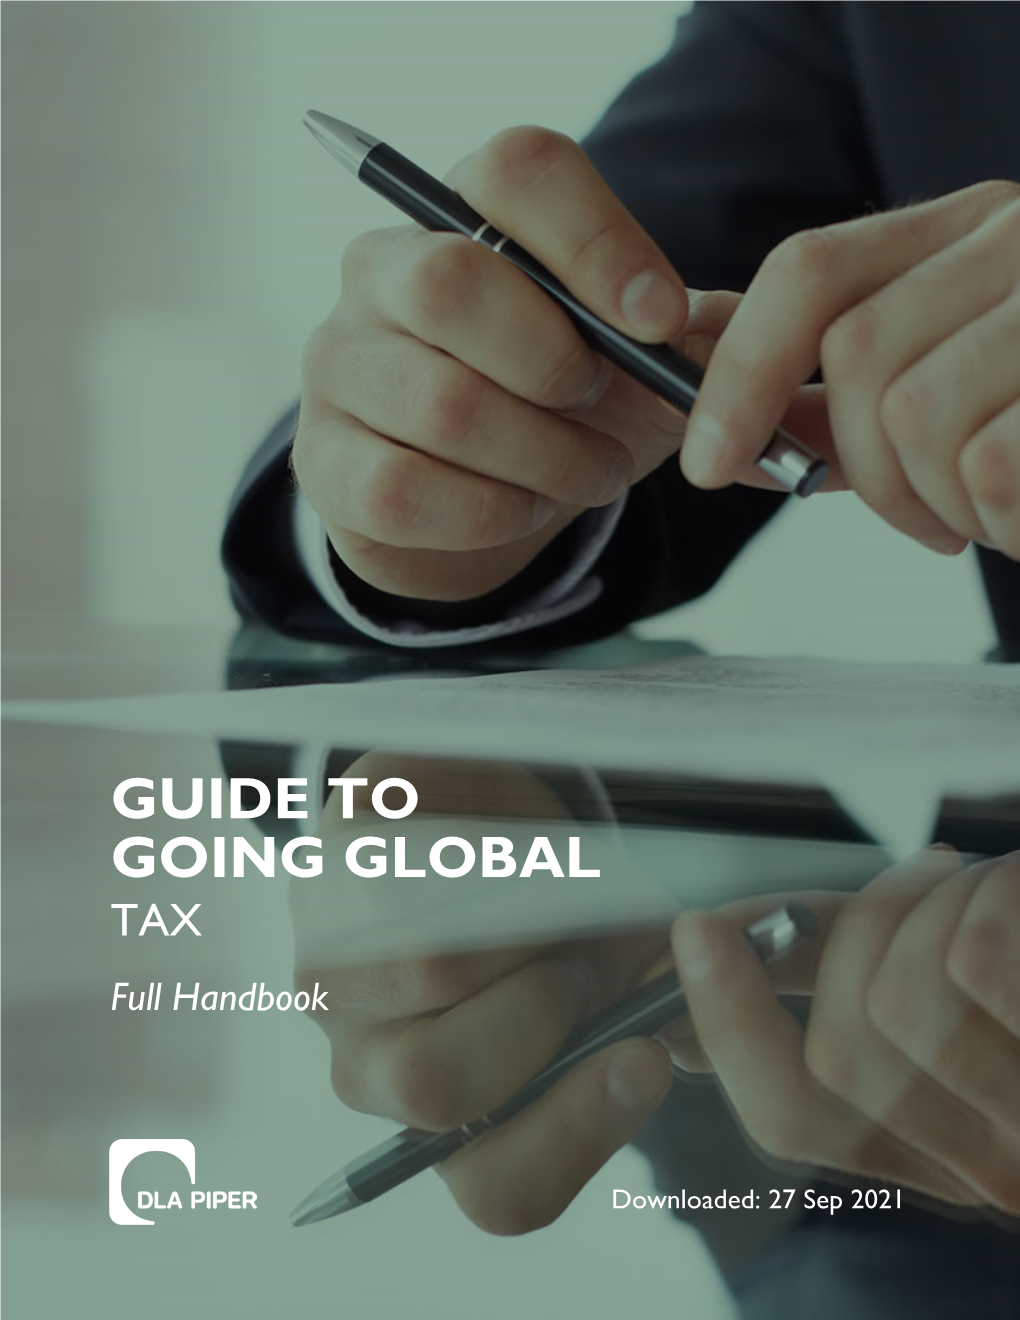 GUIDE to GOING GLOBAL TAX Full Handbook